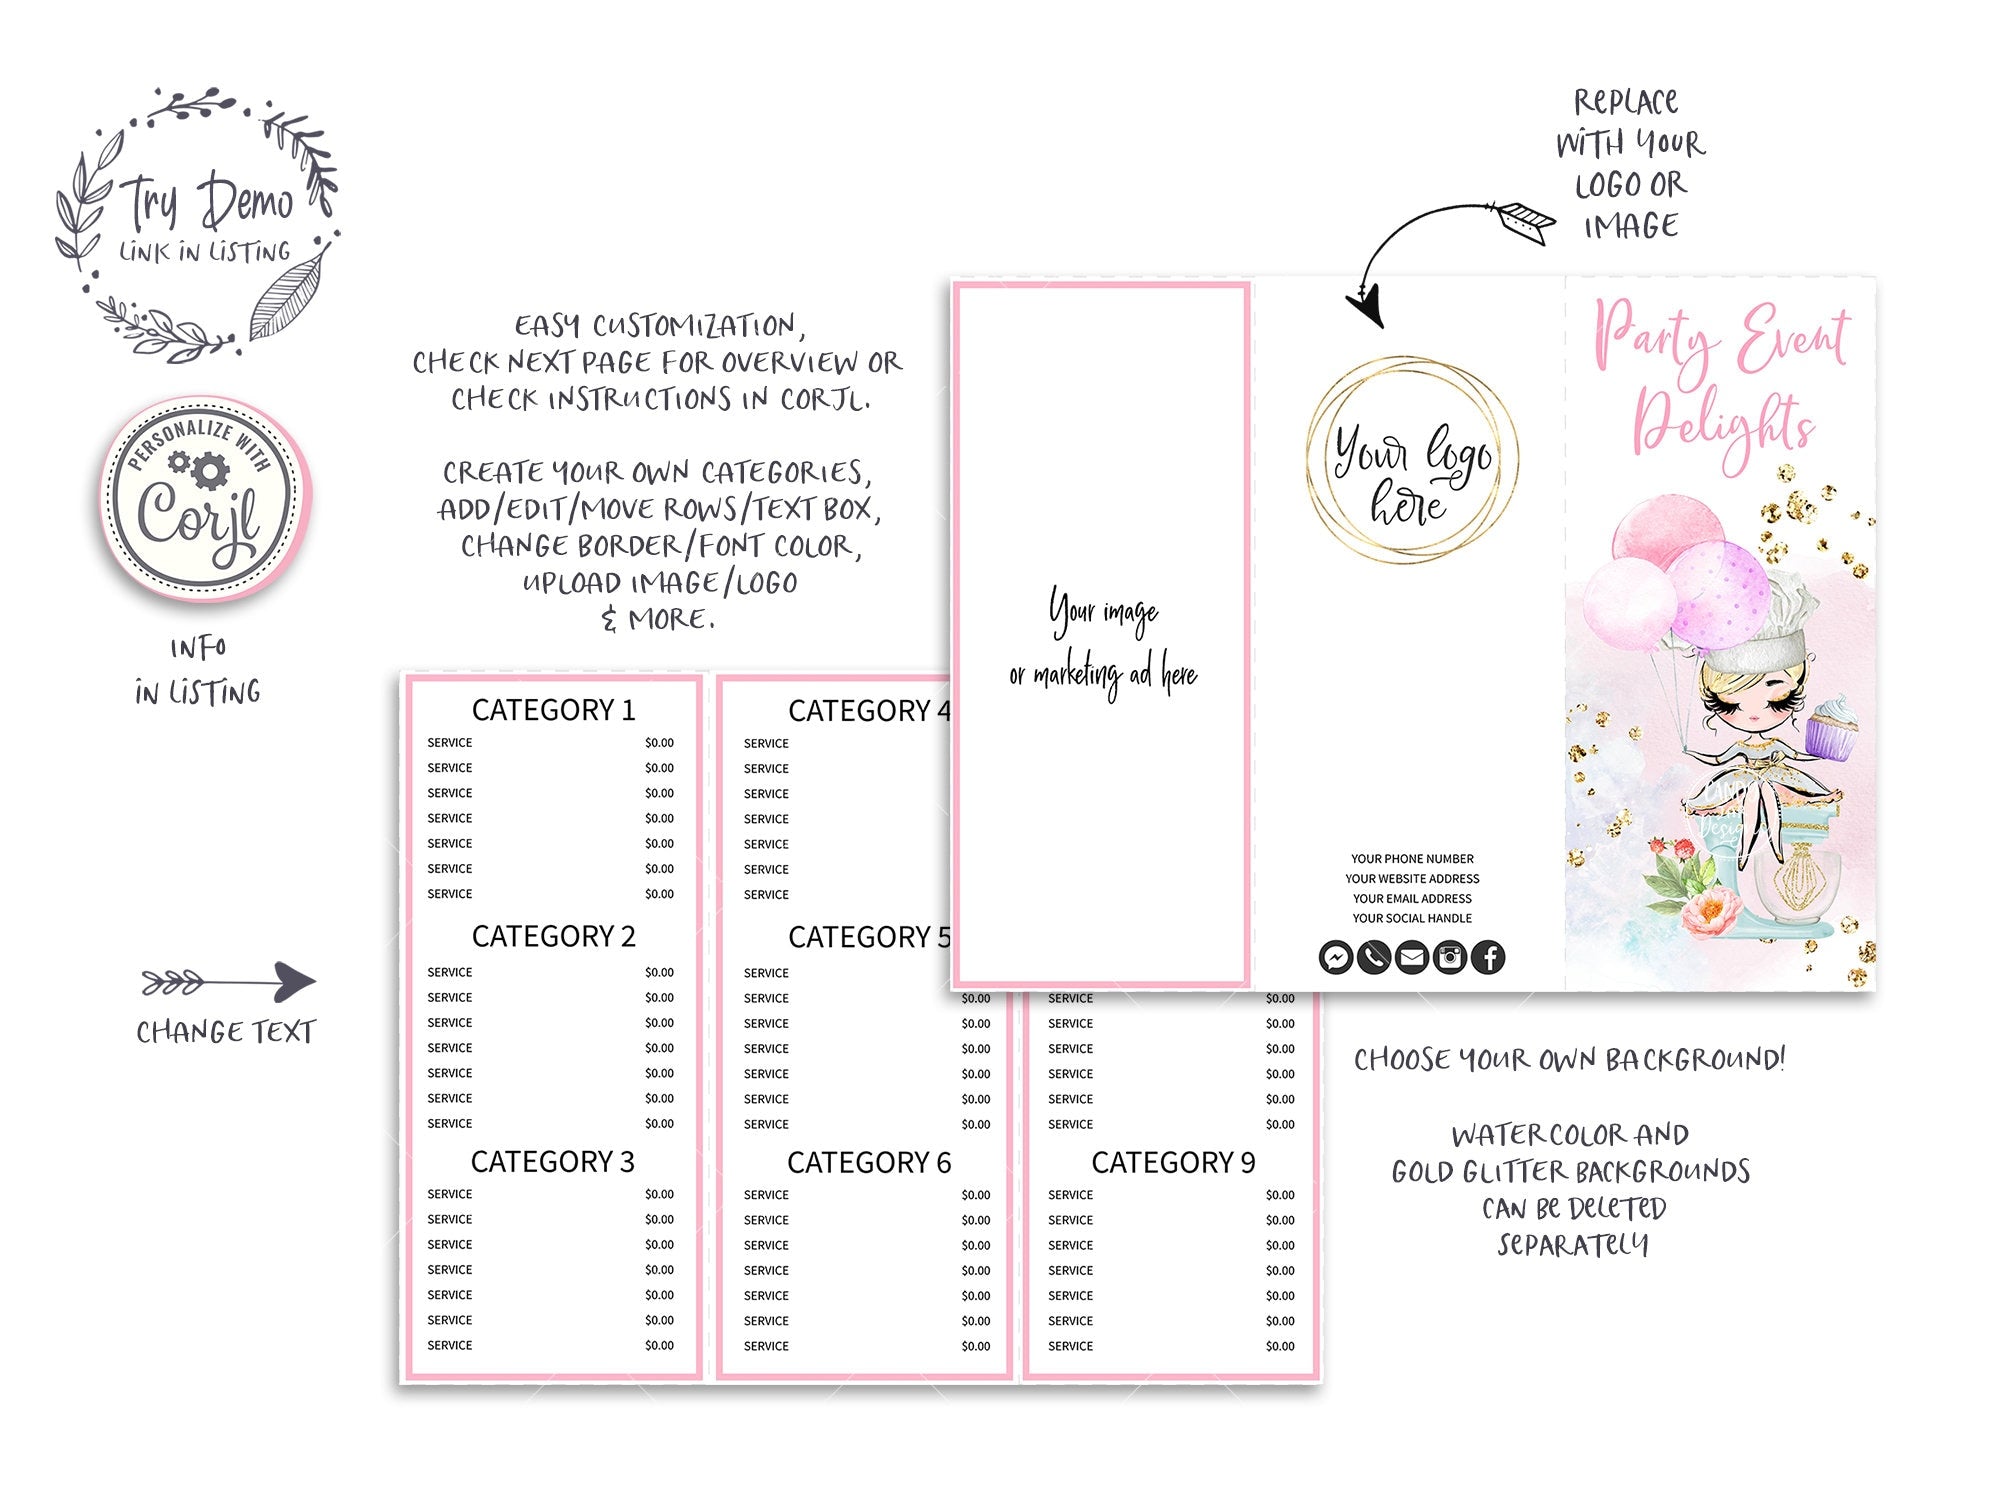 Party Events Tri-Fold Price List, Catering Menu Card, Foldable